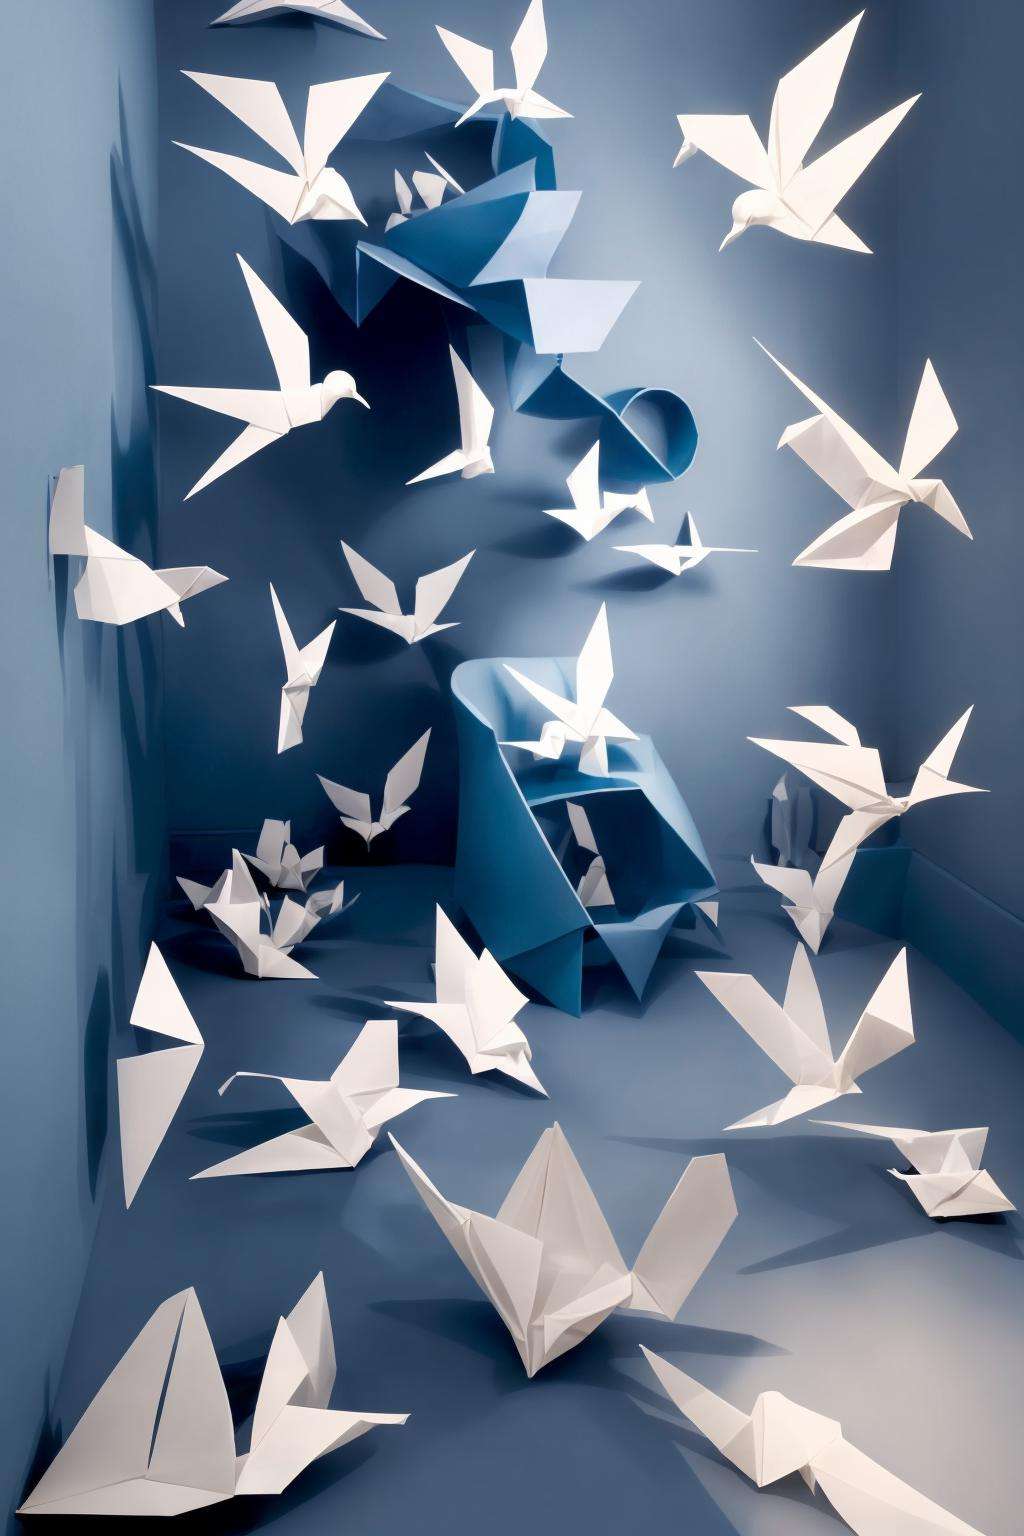 Installation: A room filled with suspended origami birds, casting intricate shadows that dance across the walls. ,  con_art2